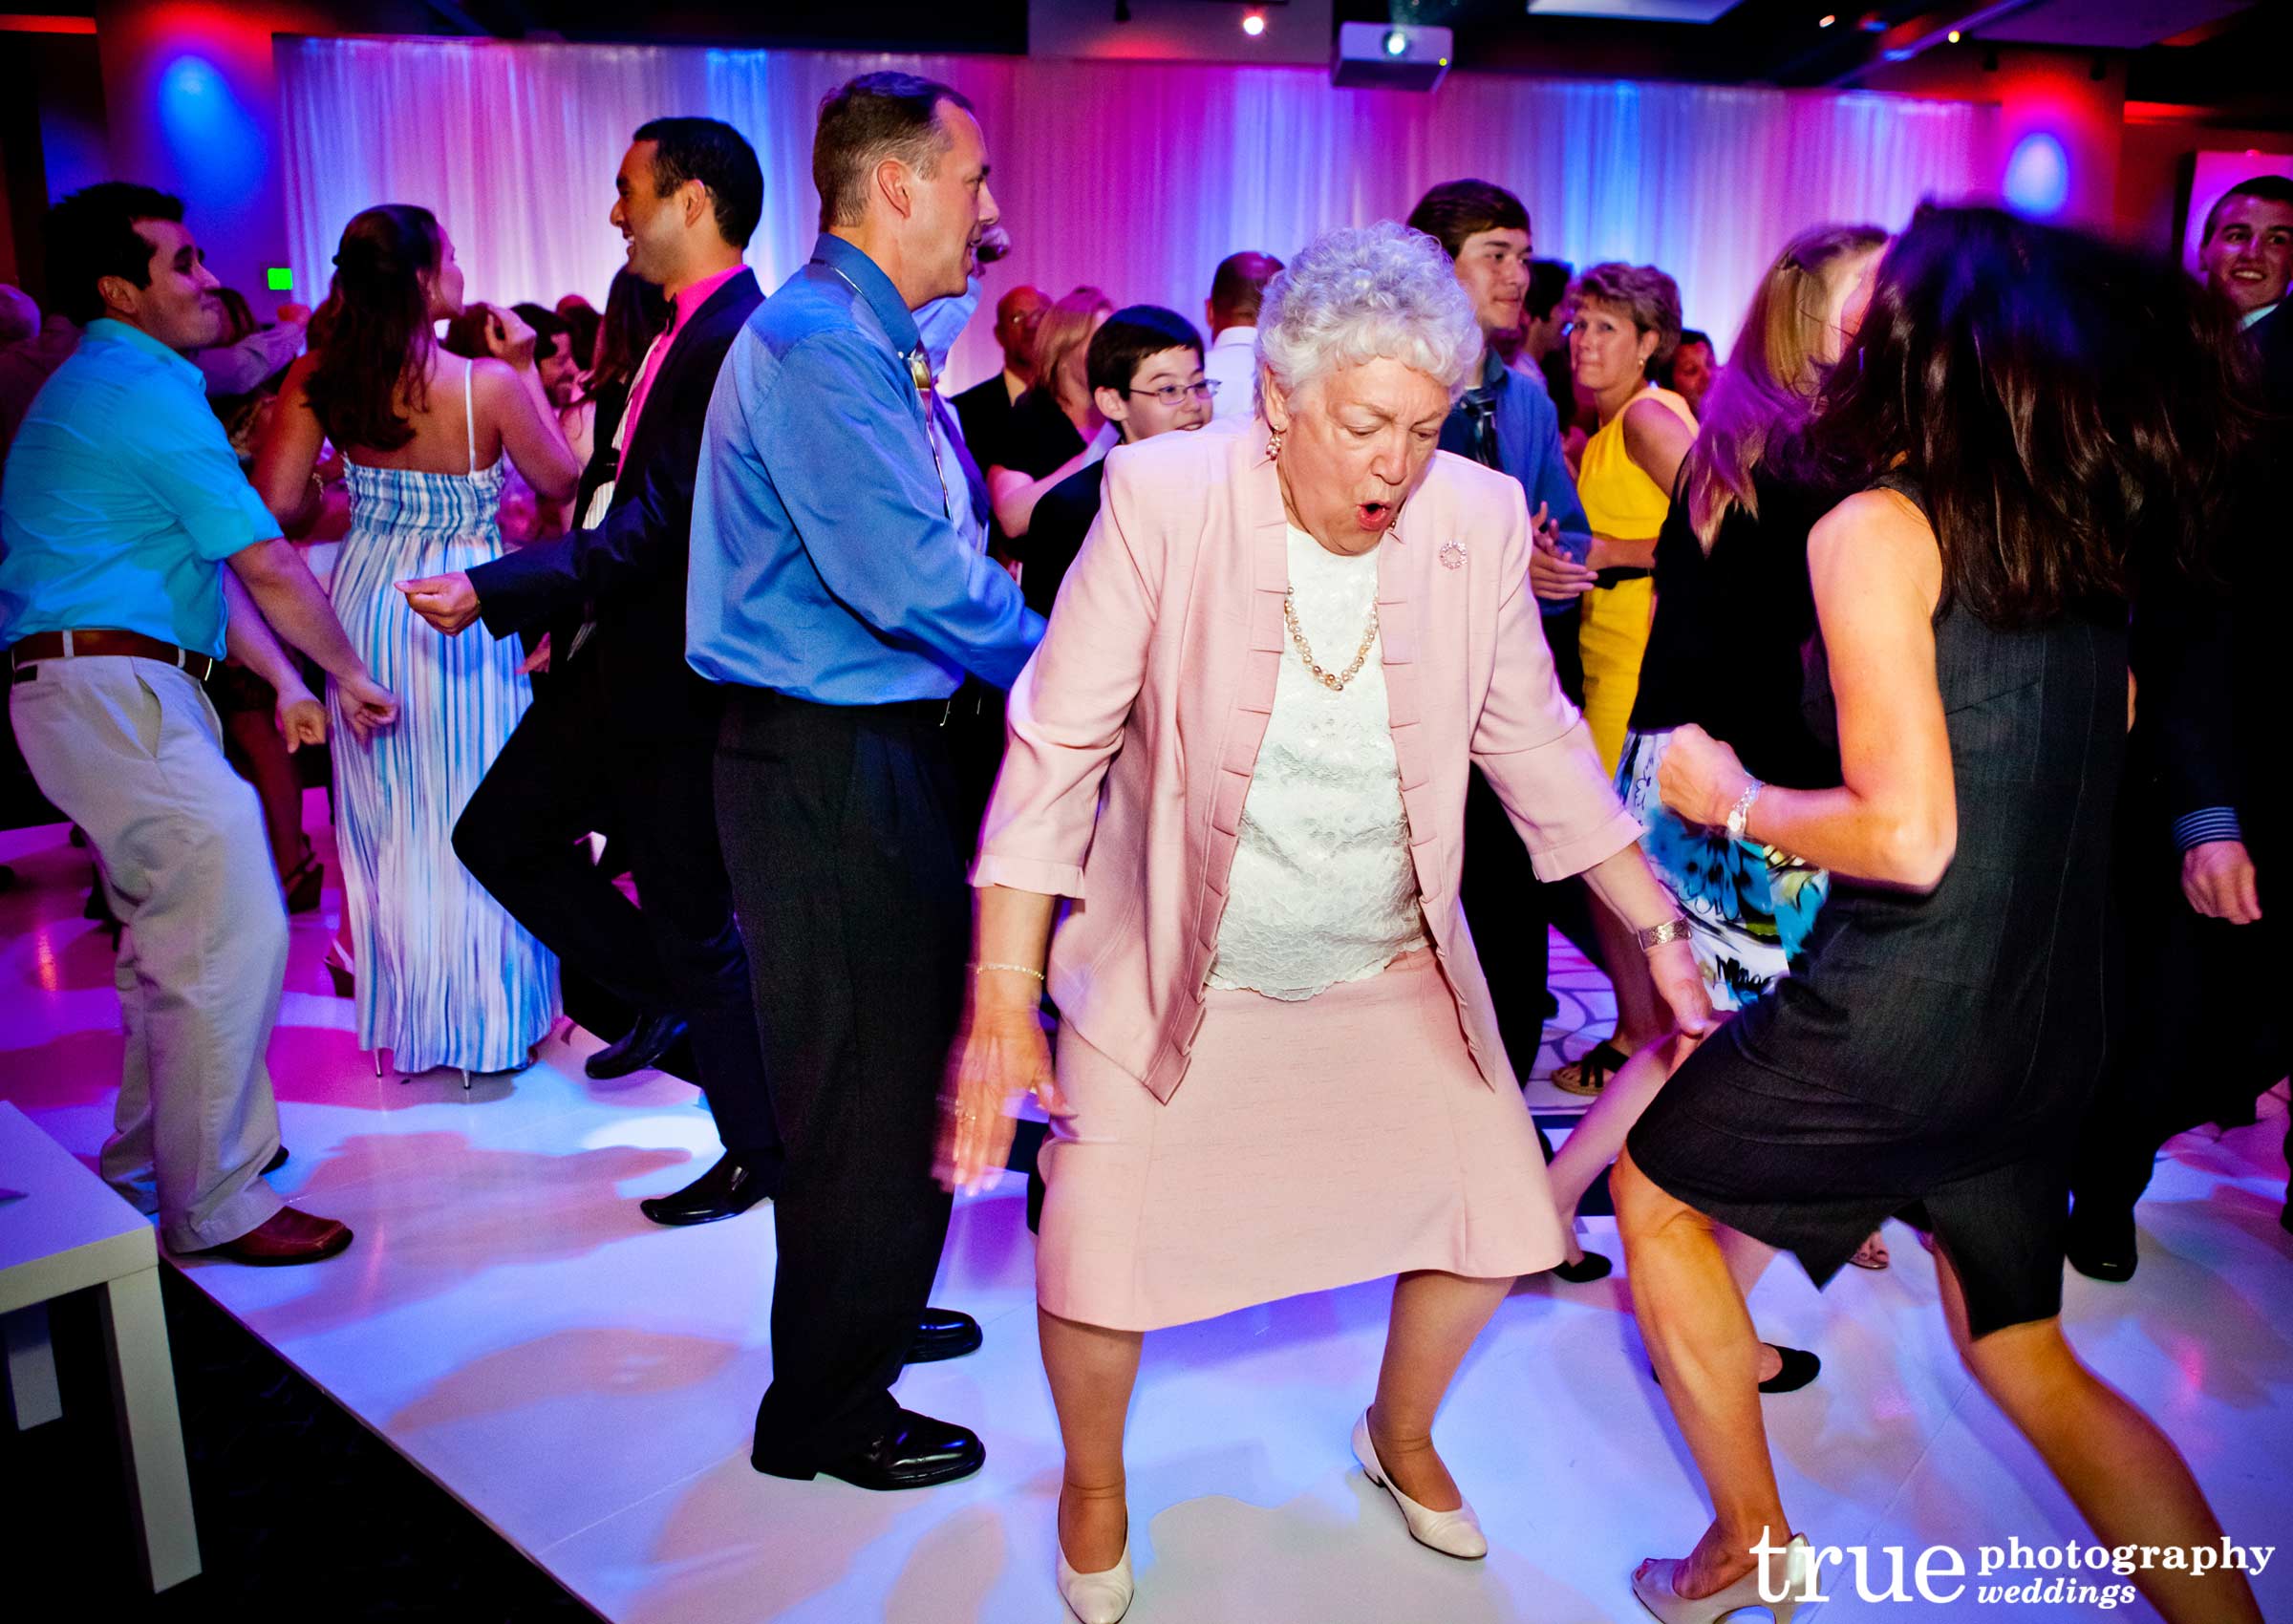 Dancing-at-wedding-reception-with-Tim-Altbaum-Productions1.jpg